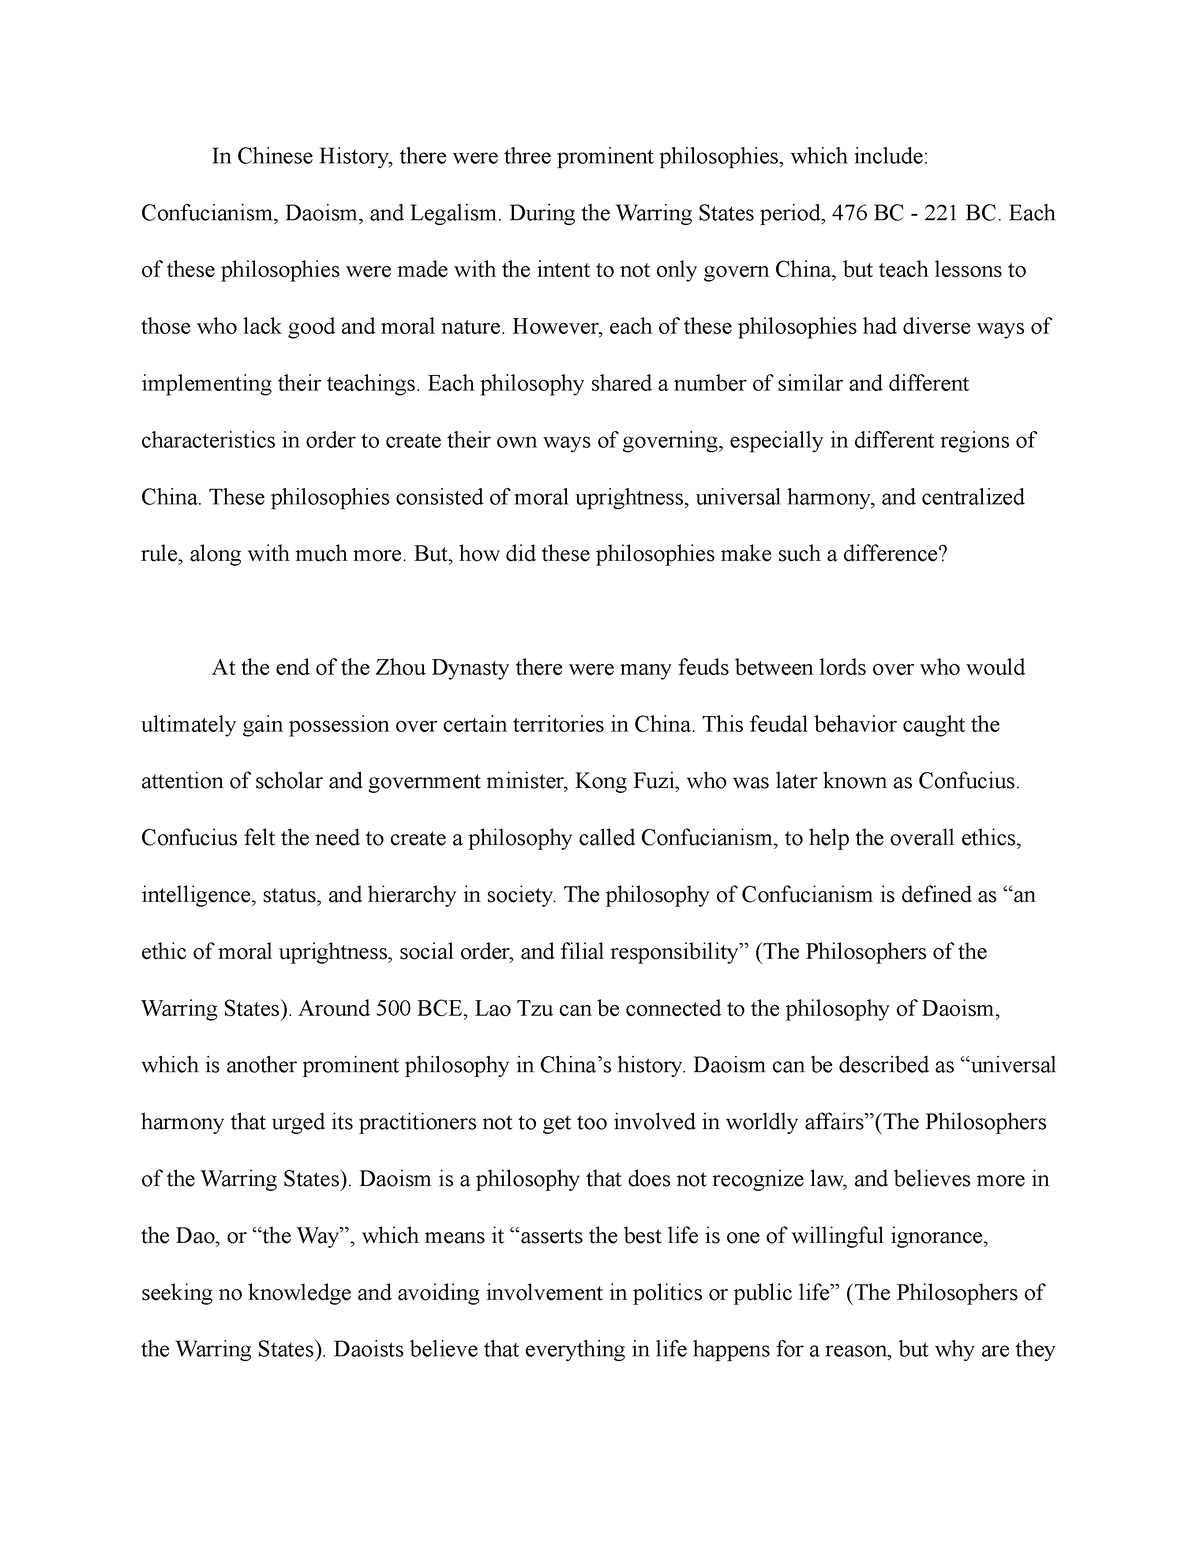 confucianism daoism and legalism essay